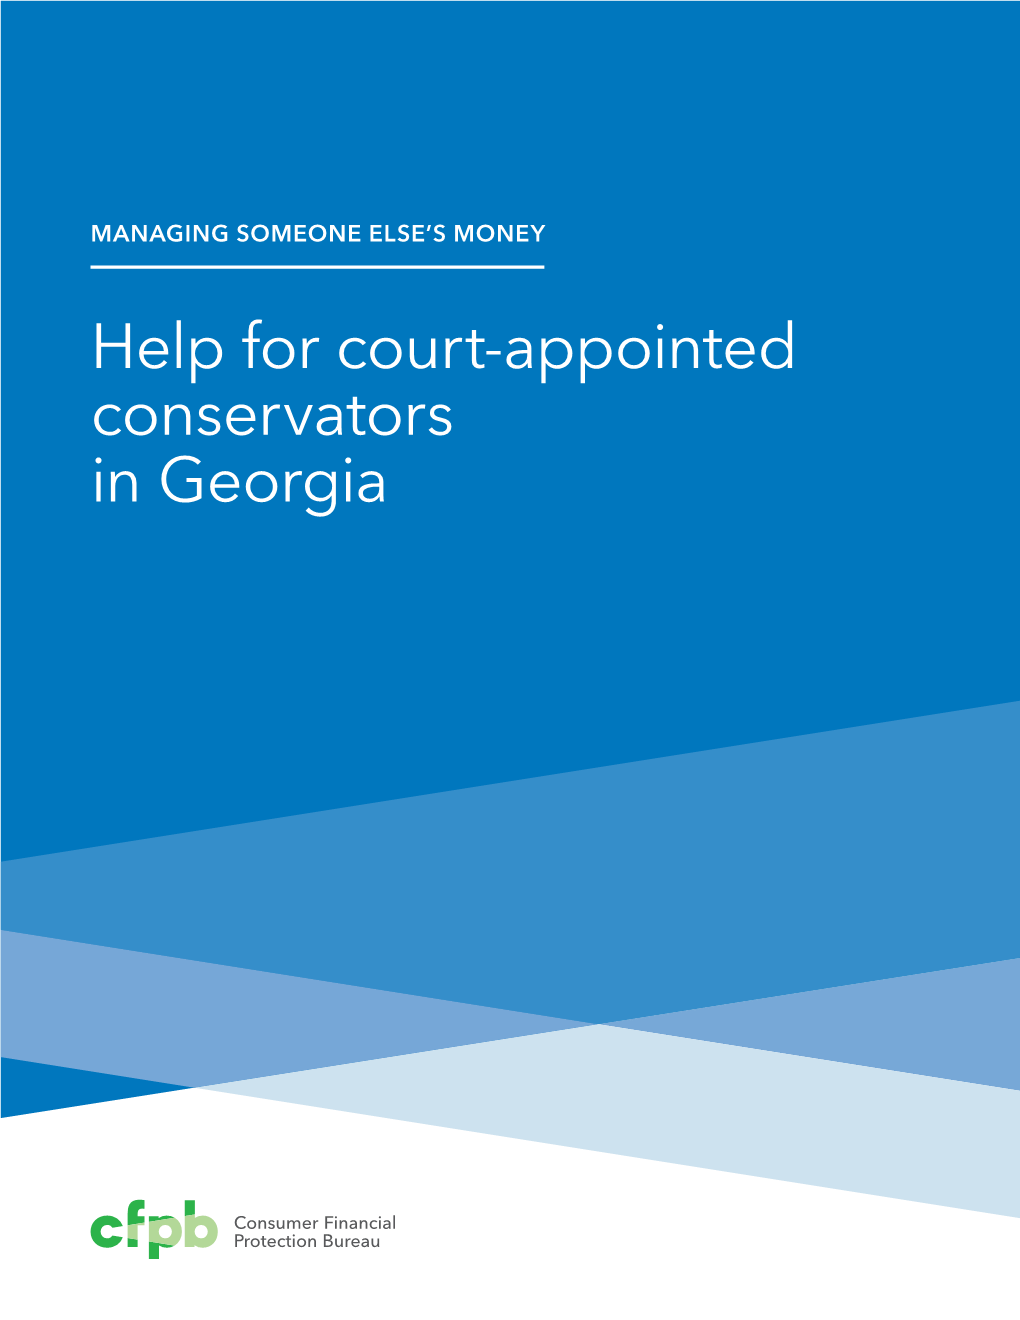 Help for Court-Appointed Conservators in Georgia